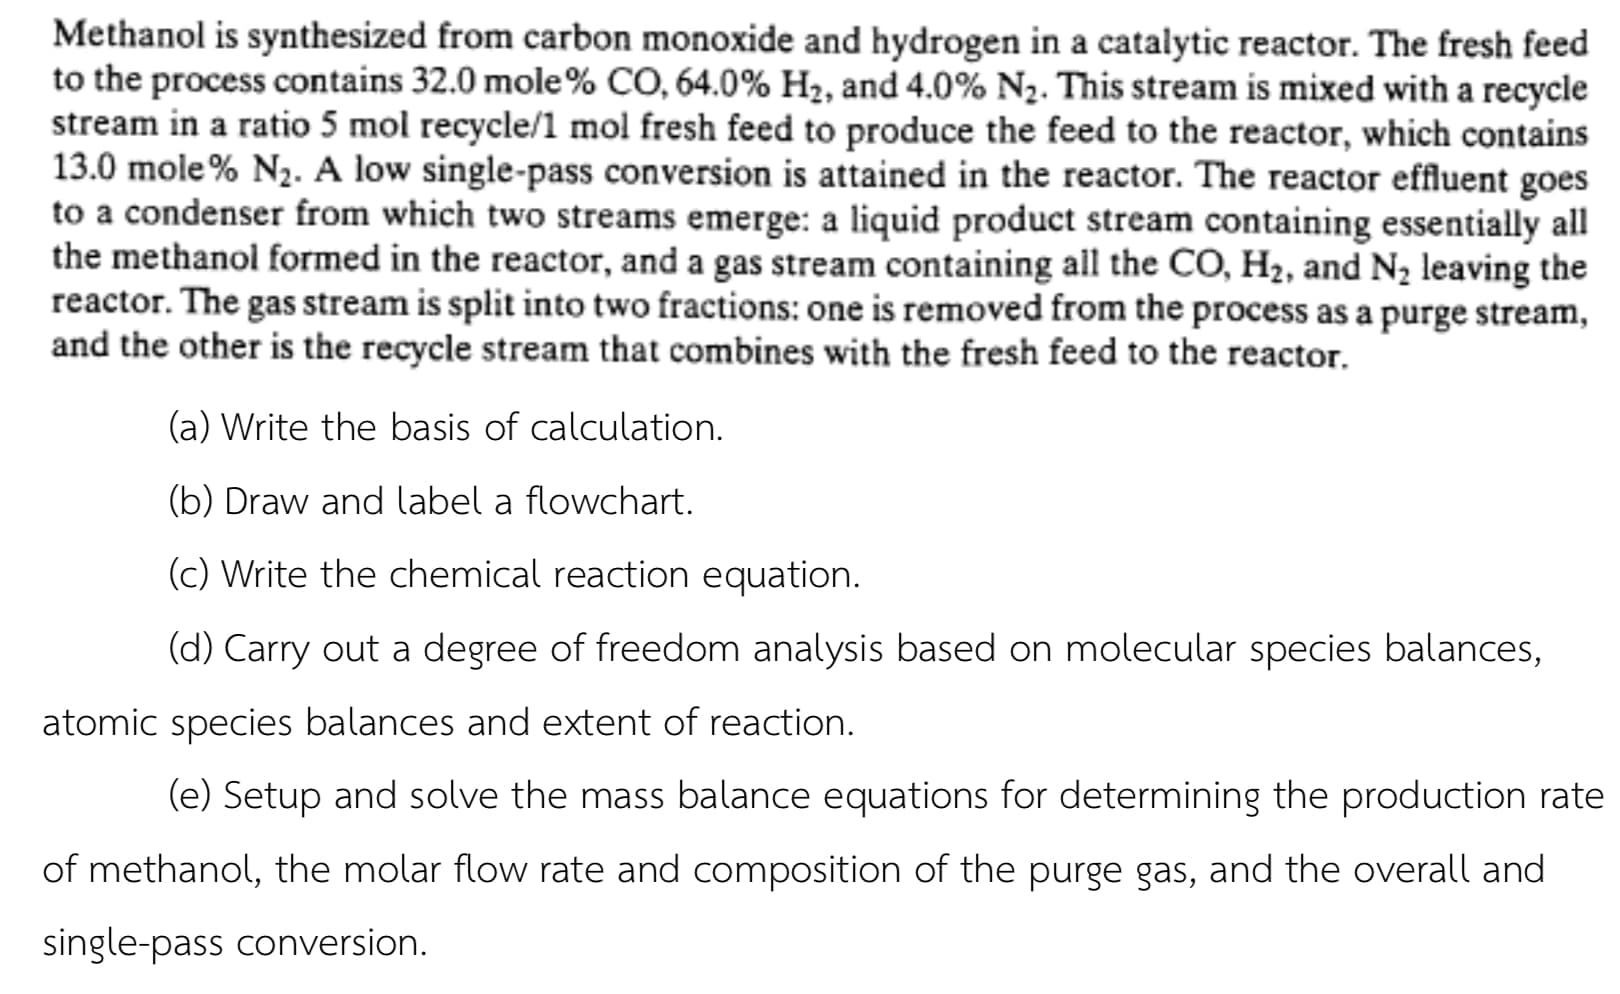 Methanol is synthesized from carbon monoxide and hydrogen in a catalytic reactor. The fresh feed
to the process contains 32.0 mole% CO, 64.0% H2, and 4.0% N2. This stream is mixed with a recycle
stream in a ratio 5 mol recycle/1 mol fresh feed to produce the feed to the reactor, which contains
13.0 mole % N2. A low single-pass conversion is attained in the reactor. The reactor effluent goes
to a condenser from which two streams emerge: a liquid product stream containing essentially all
the methanol formed in the reactor, and a gas stream containing all the CO, H2, and N2 leaving the
reactor. The gas stream is split into two fractions: one is removed from the process as a purge stream,
and the other is the recycle stream that combines with the fresh feed to the reactor.
(a) Write the basis of calculation.
(b) Draw and label a flowchart.
(c) Write the chemical reaction equation.
(d) Carry out a degree of freedom analysis based on molecular species balances,
atomic species balances and extent of reaction.
(e) Setup and solve the mass balance equations for determining the production rate
of methanol, the molar flow rate and composition of the purge gas, and the overall and
single-pass conversion.
